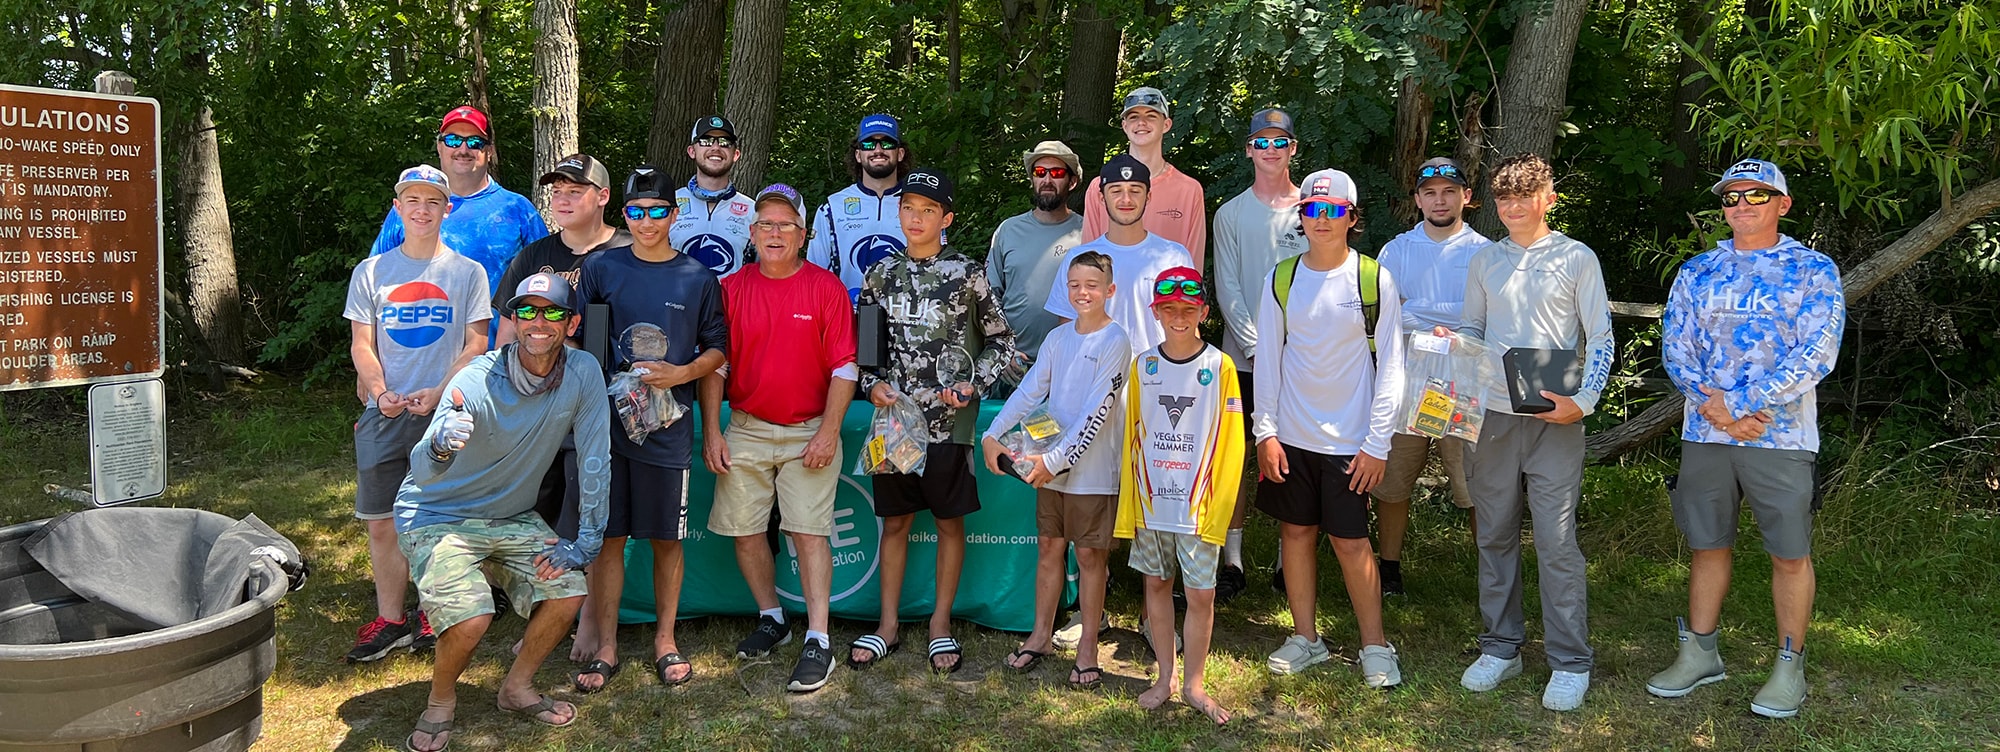 Youth Tournament Trail 2022 - Lums Pond - The Ike Foundation